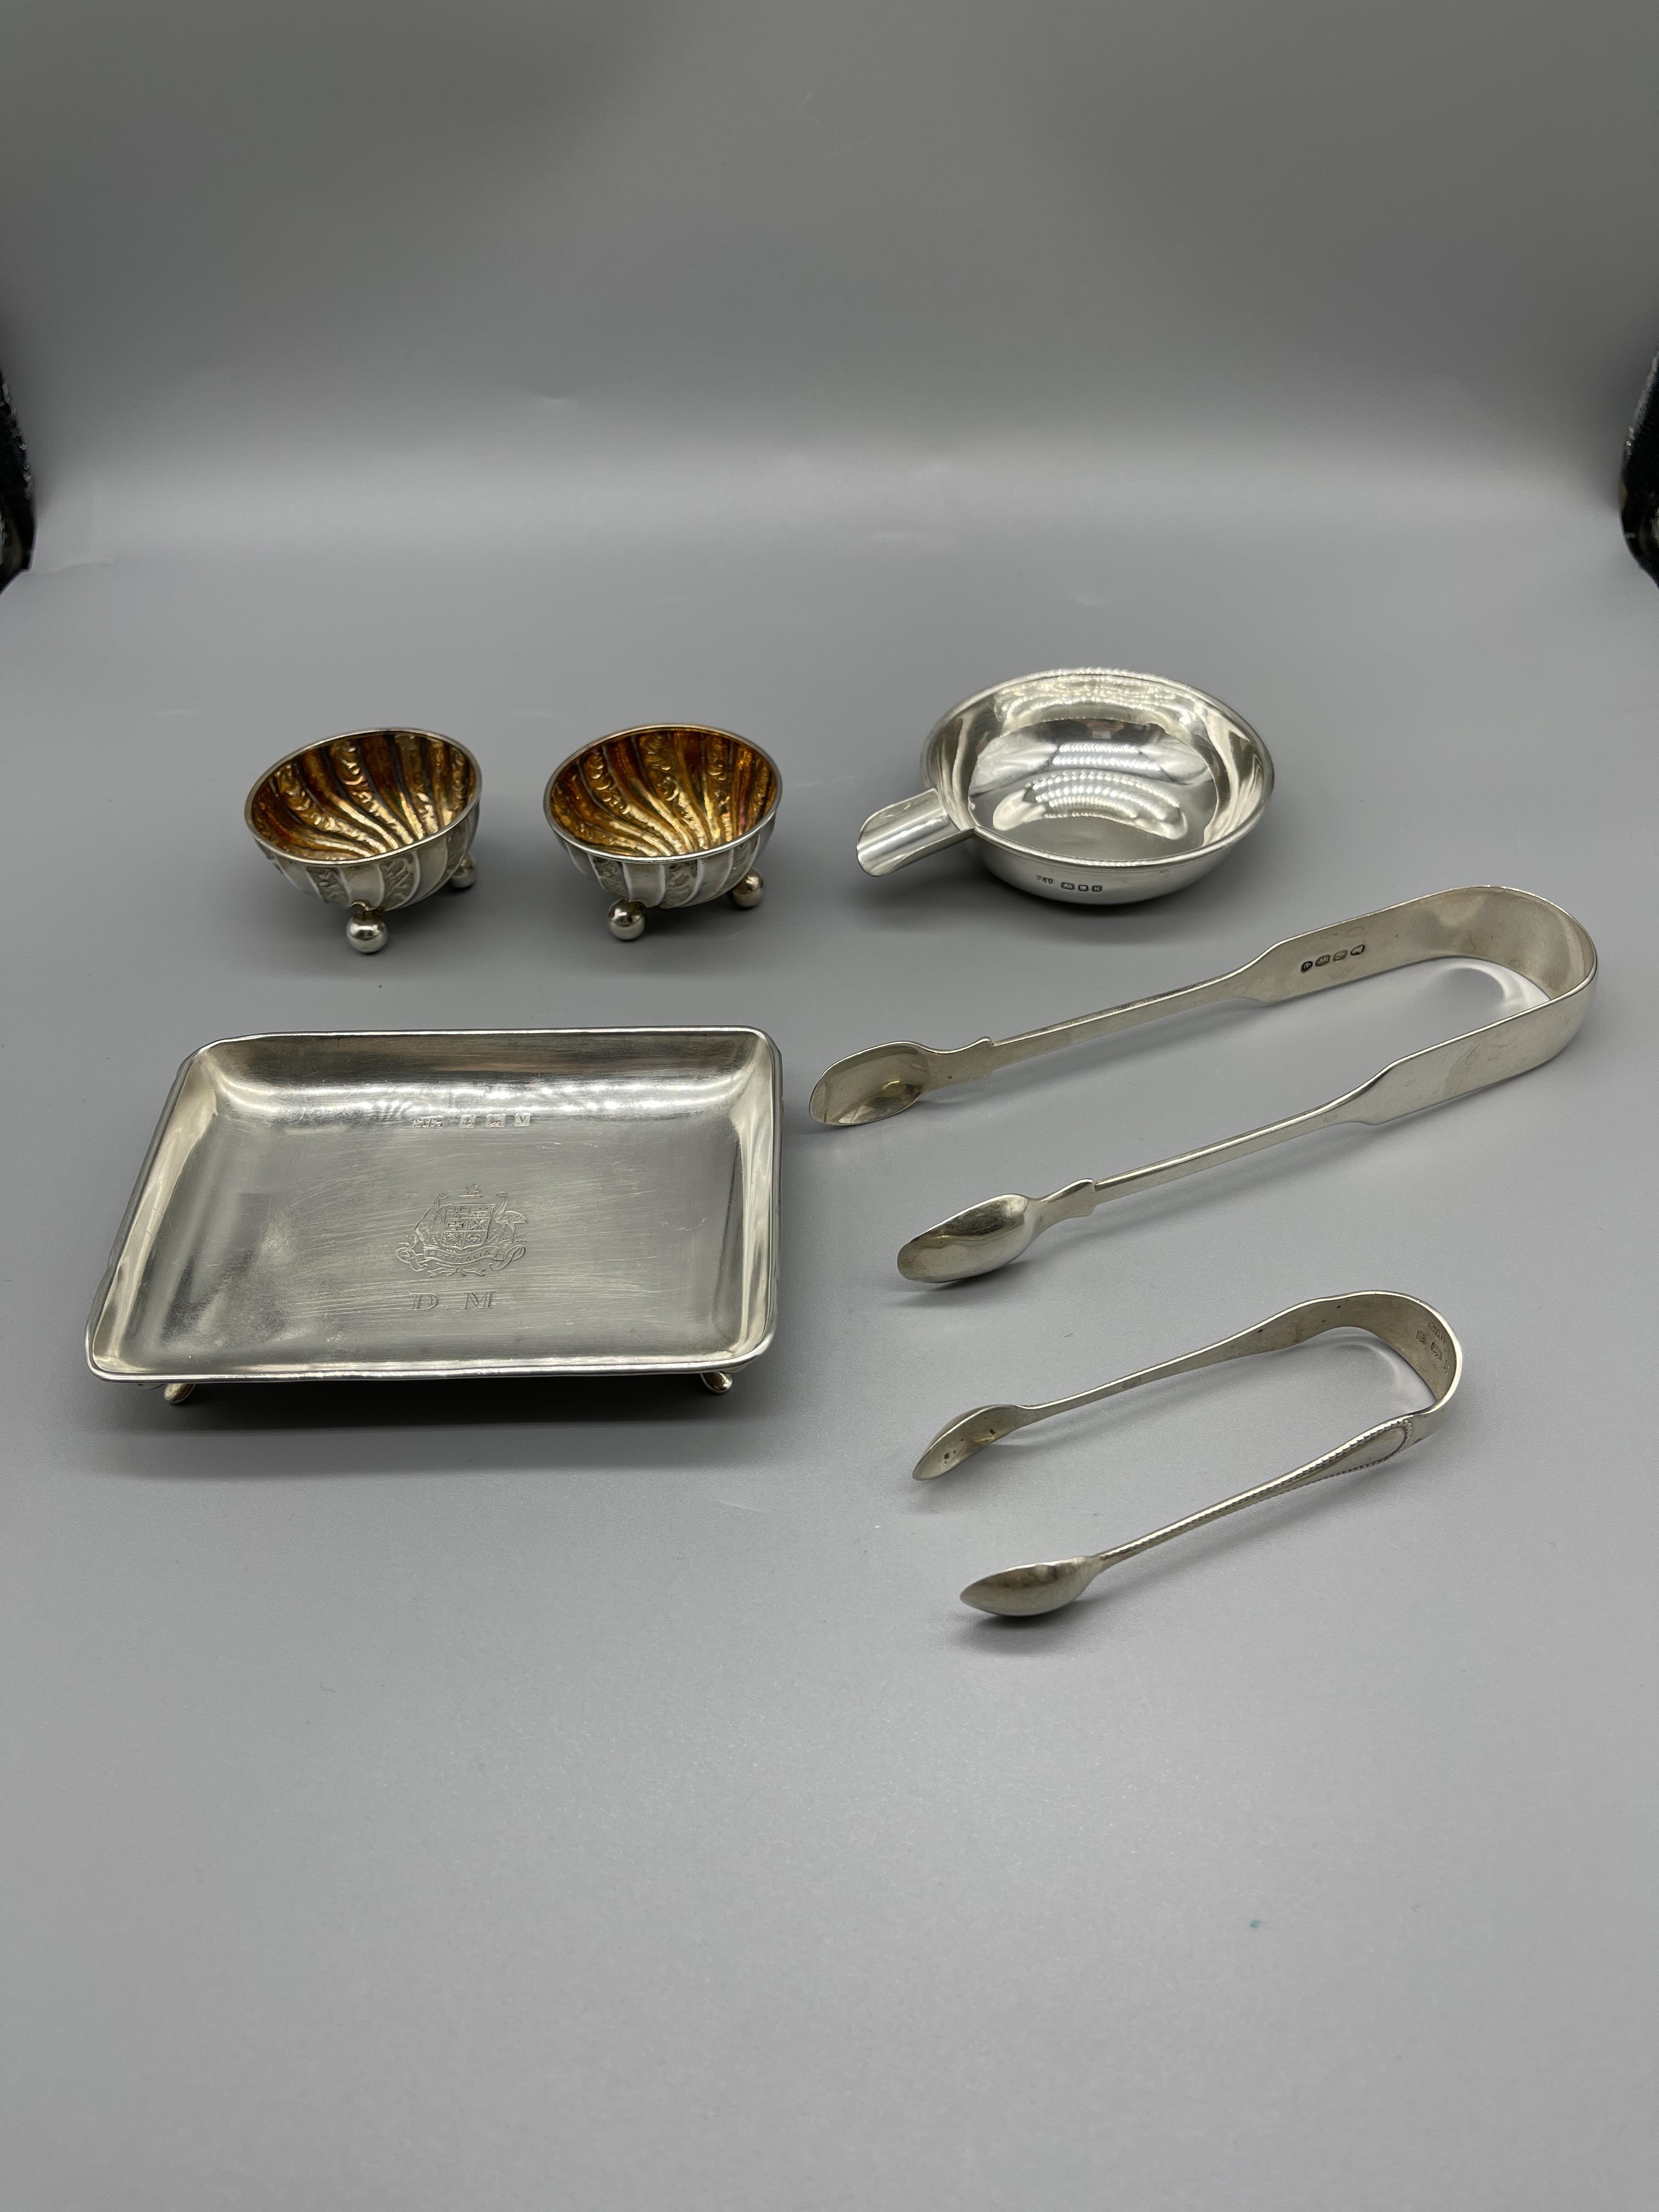 Two HM Silver ashtrays, salts and snips.160 G - Image 3 of 11